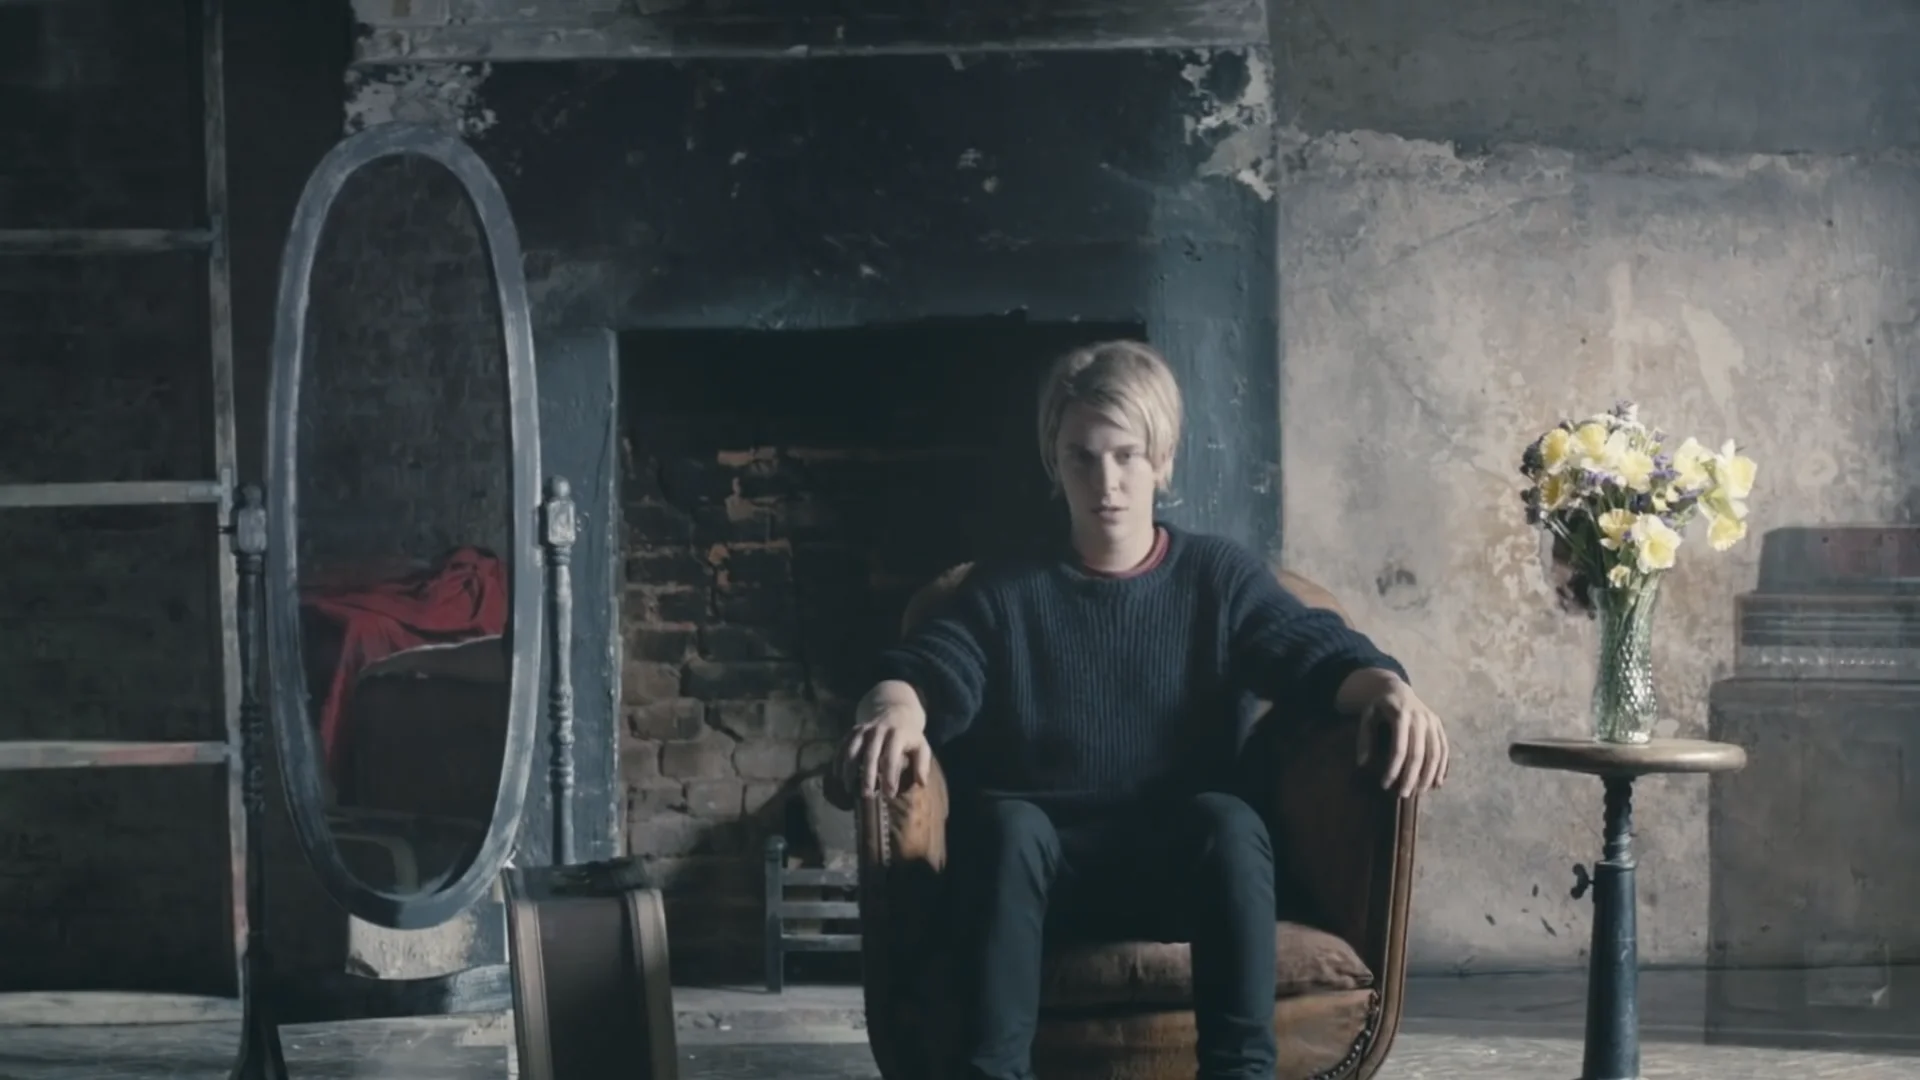 Tom Odell - Another Love (Official Lyric Video) 